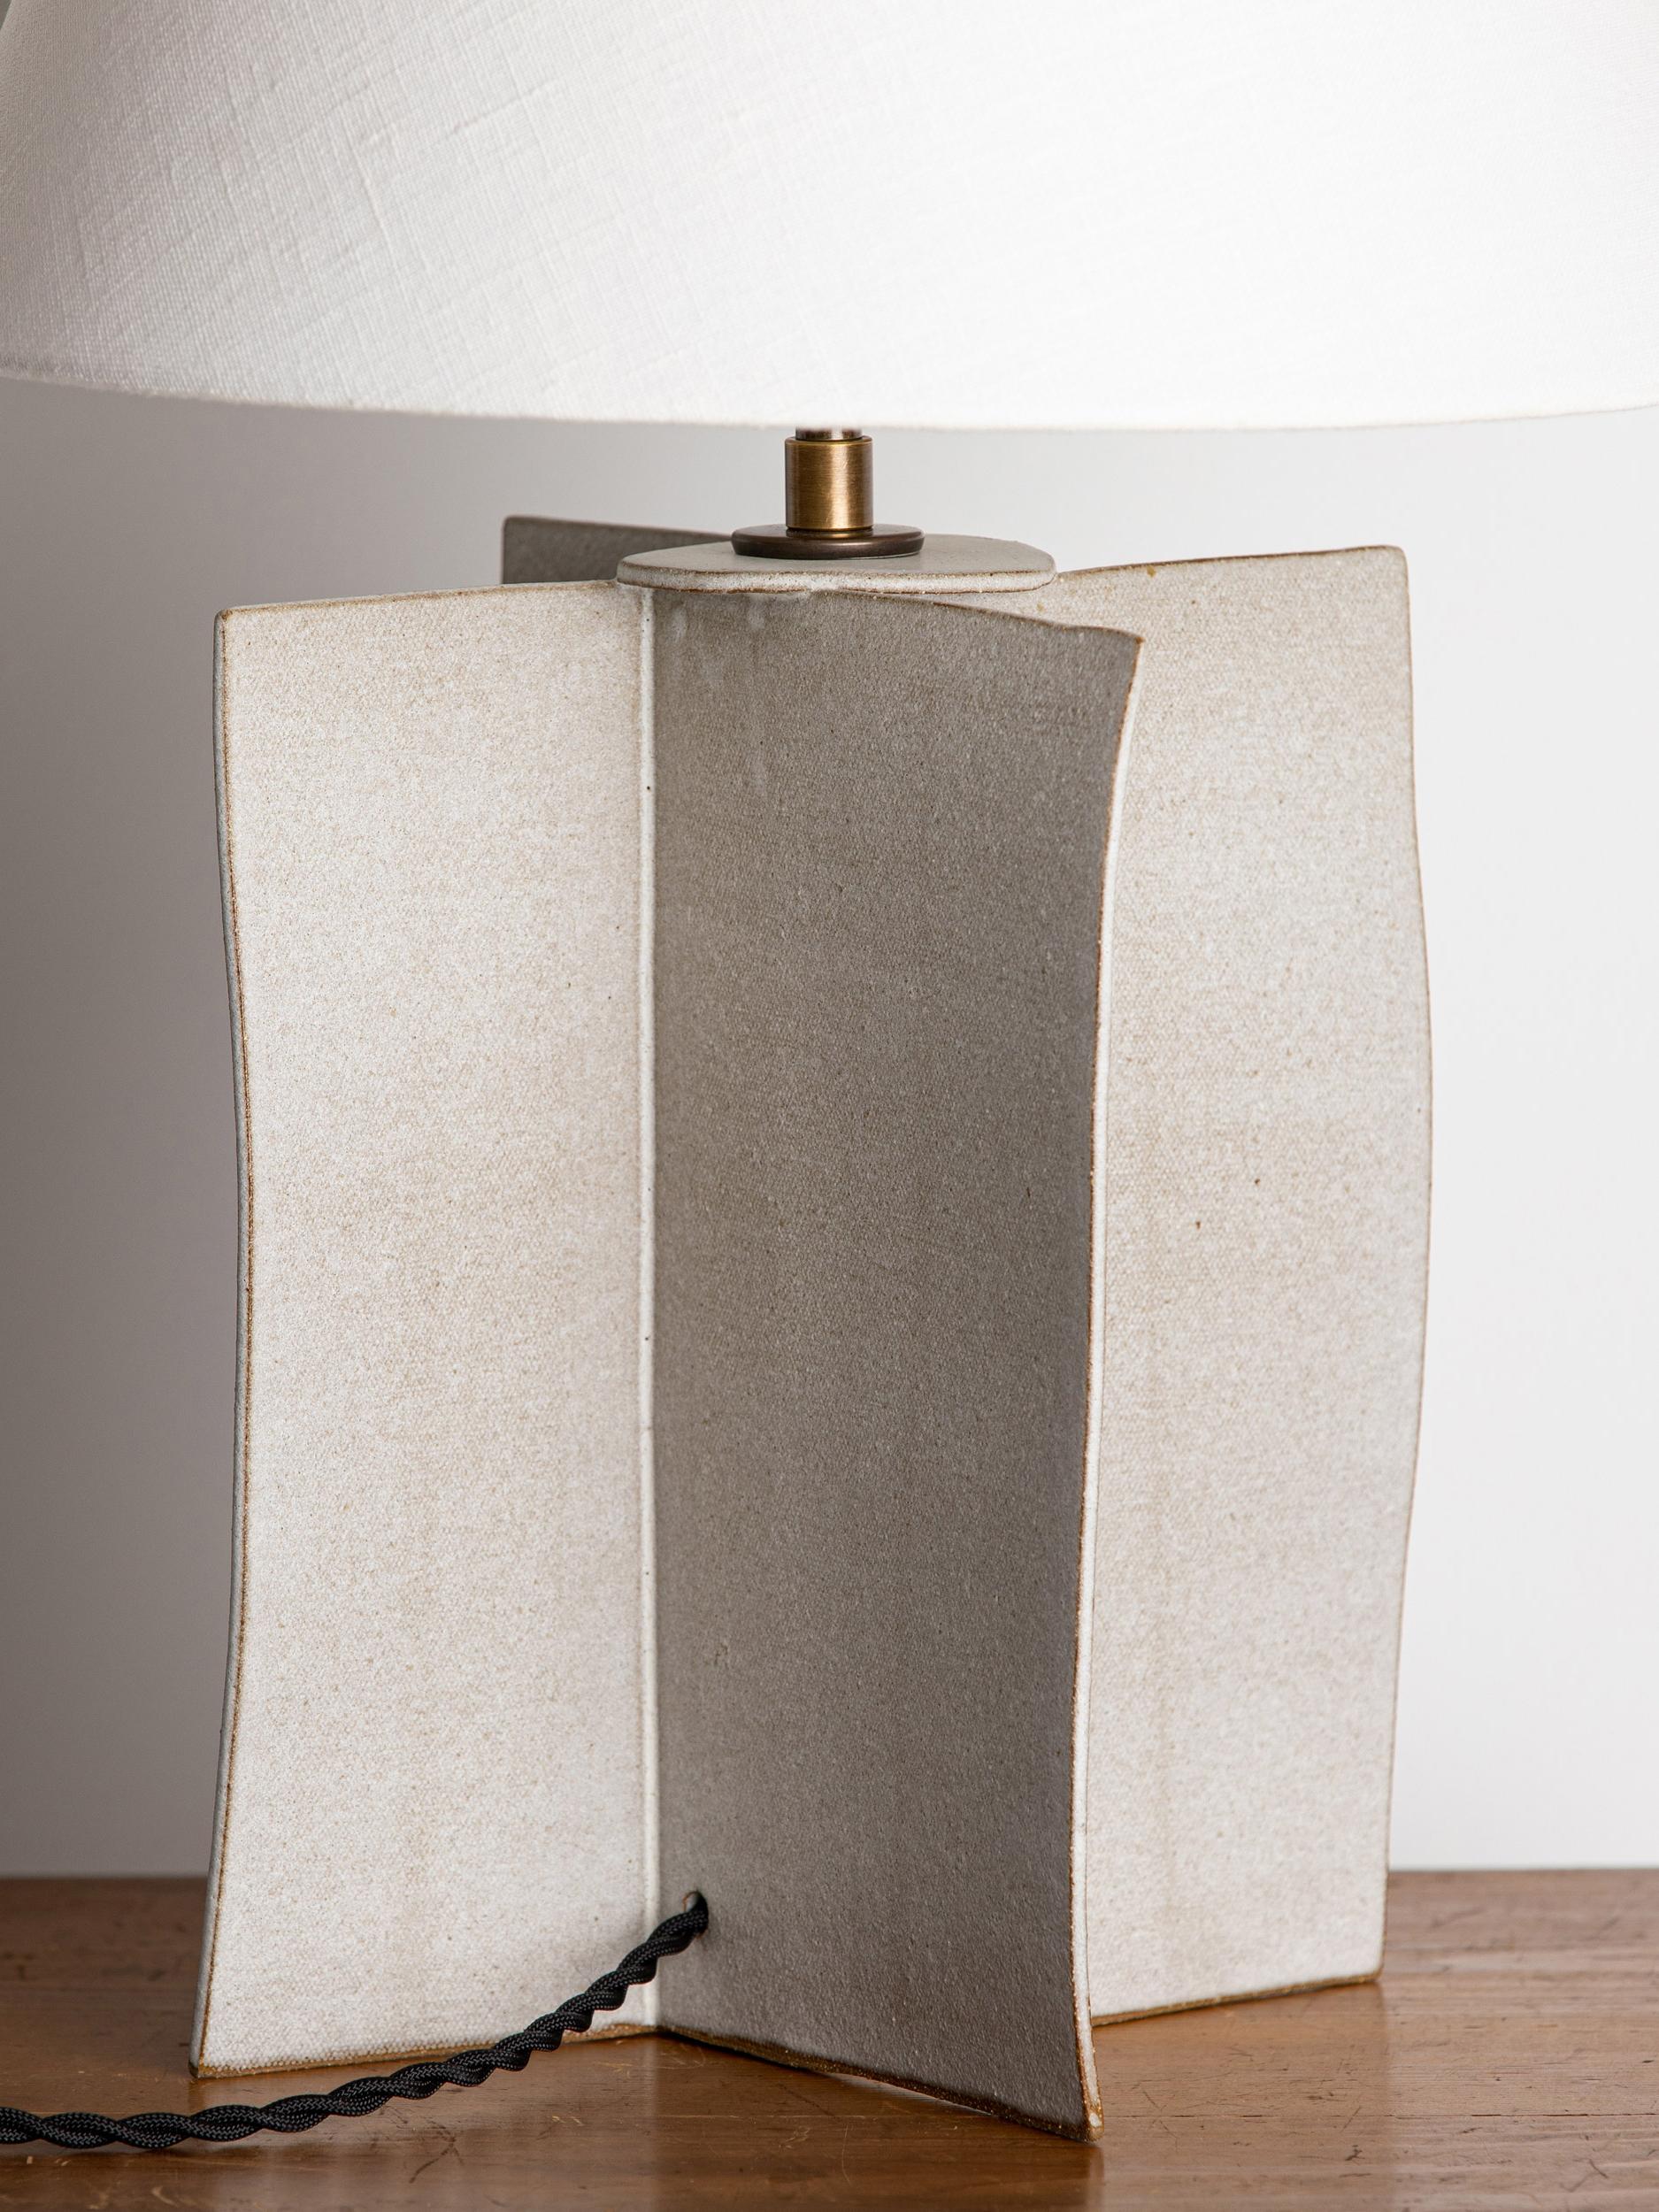 Our stoneware Windsor Lamp is handcrafted using slab-construction techniques.

FINISH

- Dipped glaze, pictured in parchment 
- Antique brass fittings
- Twisted black-cloth cord
- Full-range dimmer socket
- Paper or linen